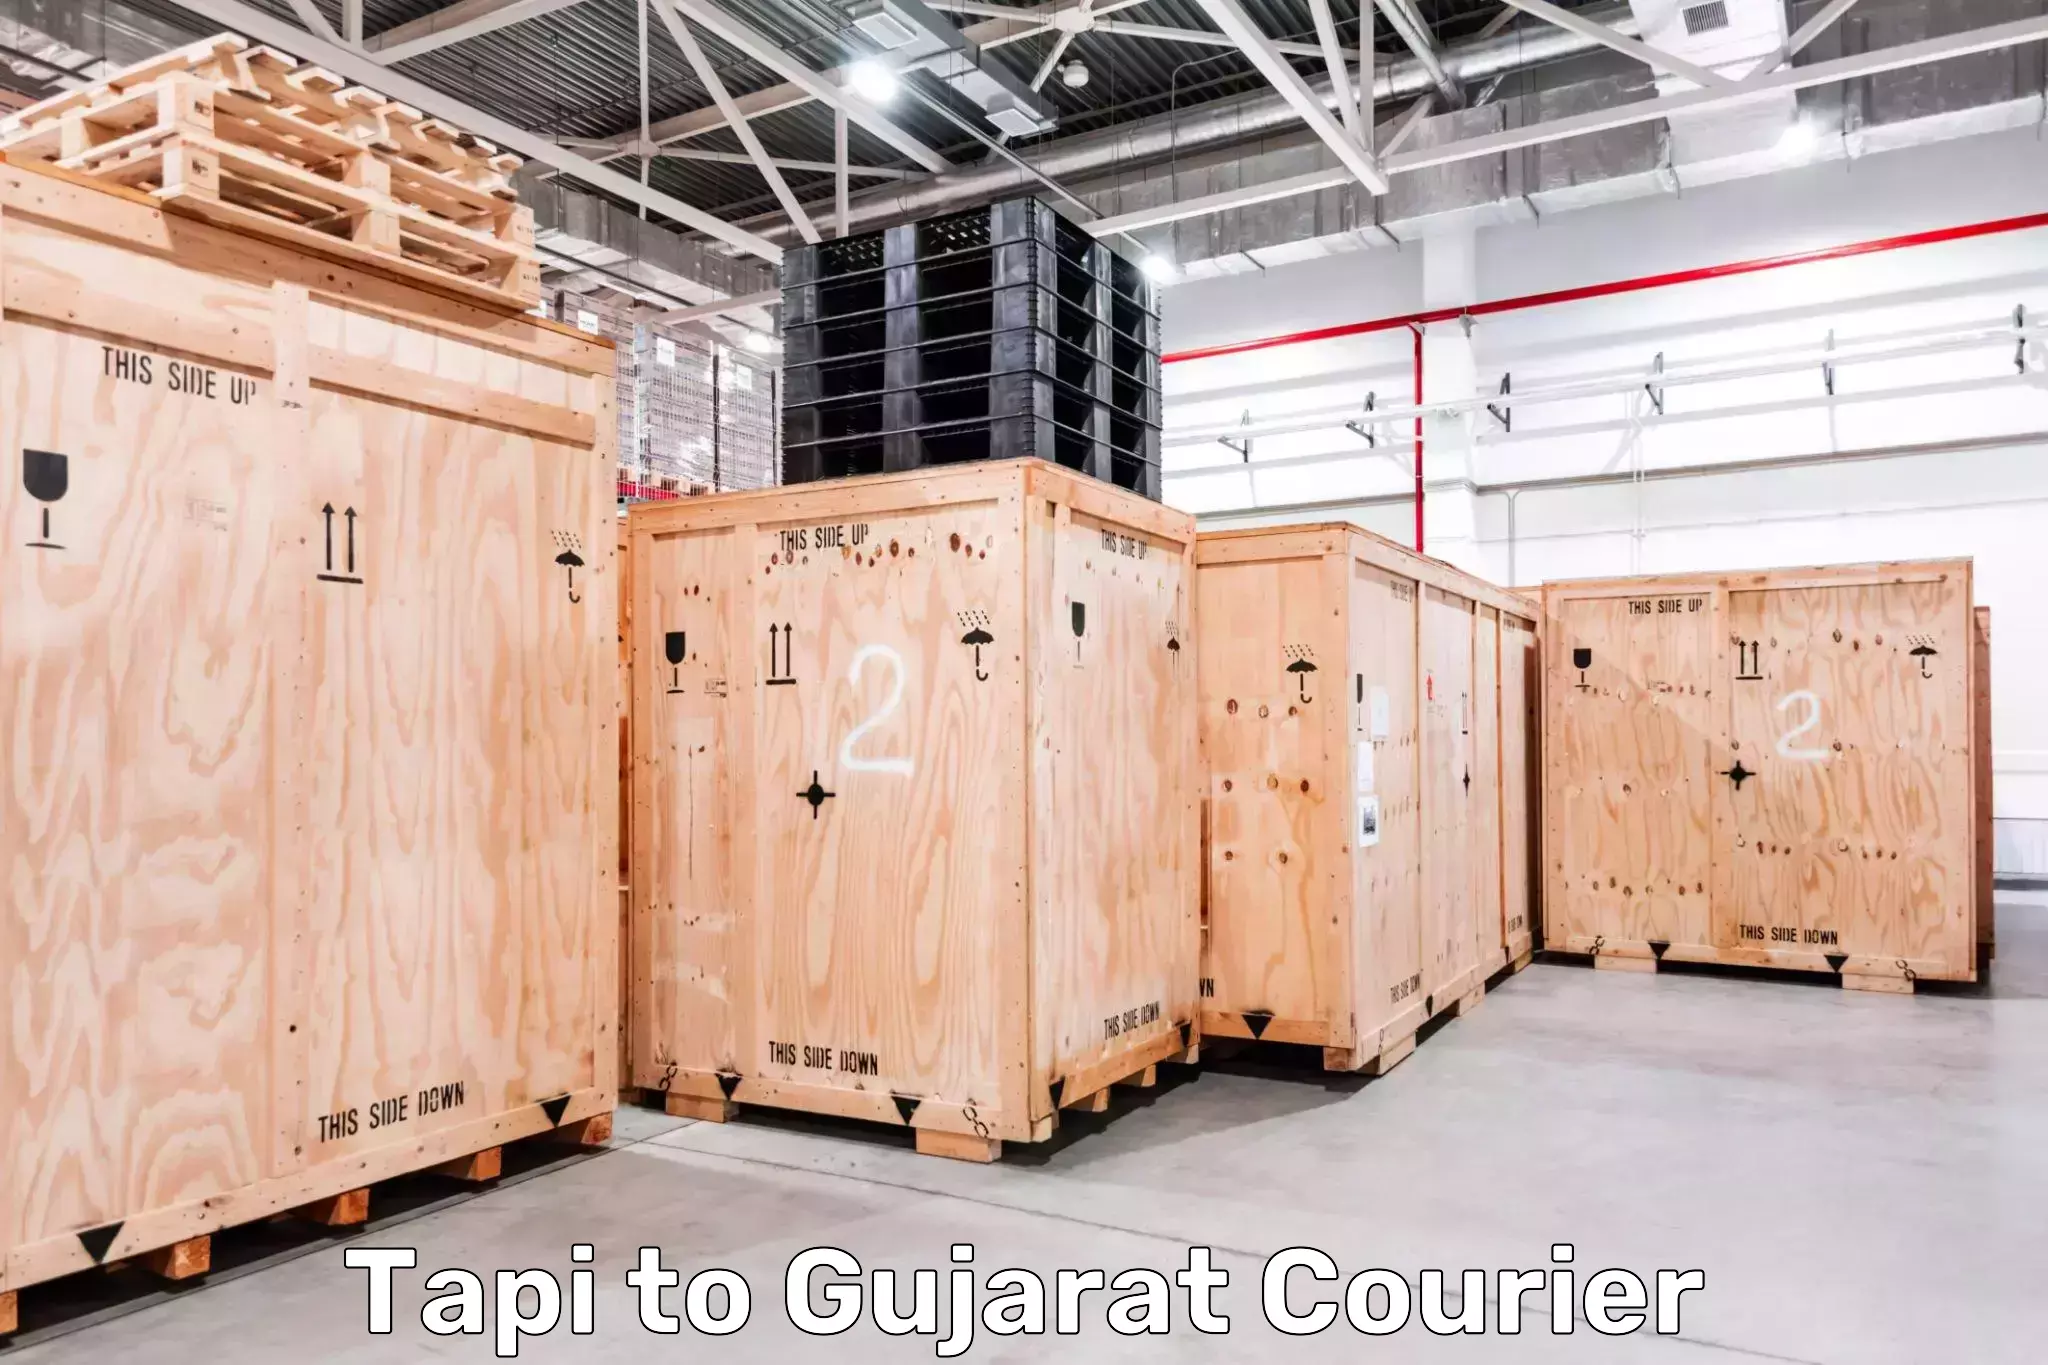 Courier service efficiency Tapi to Gujarat